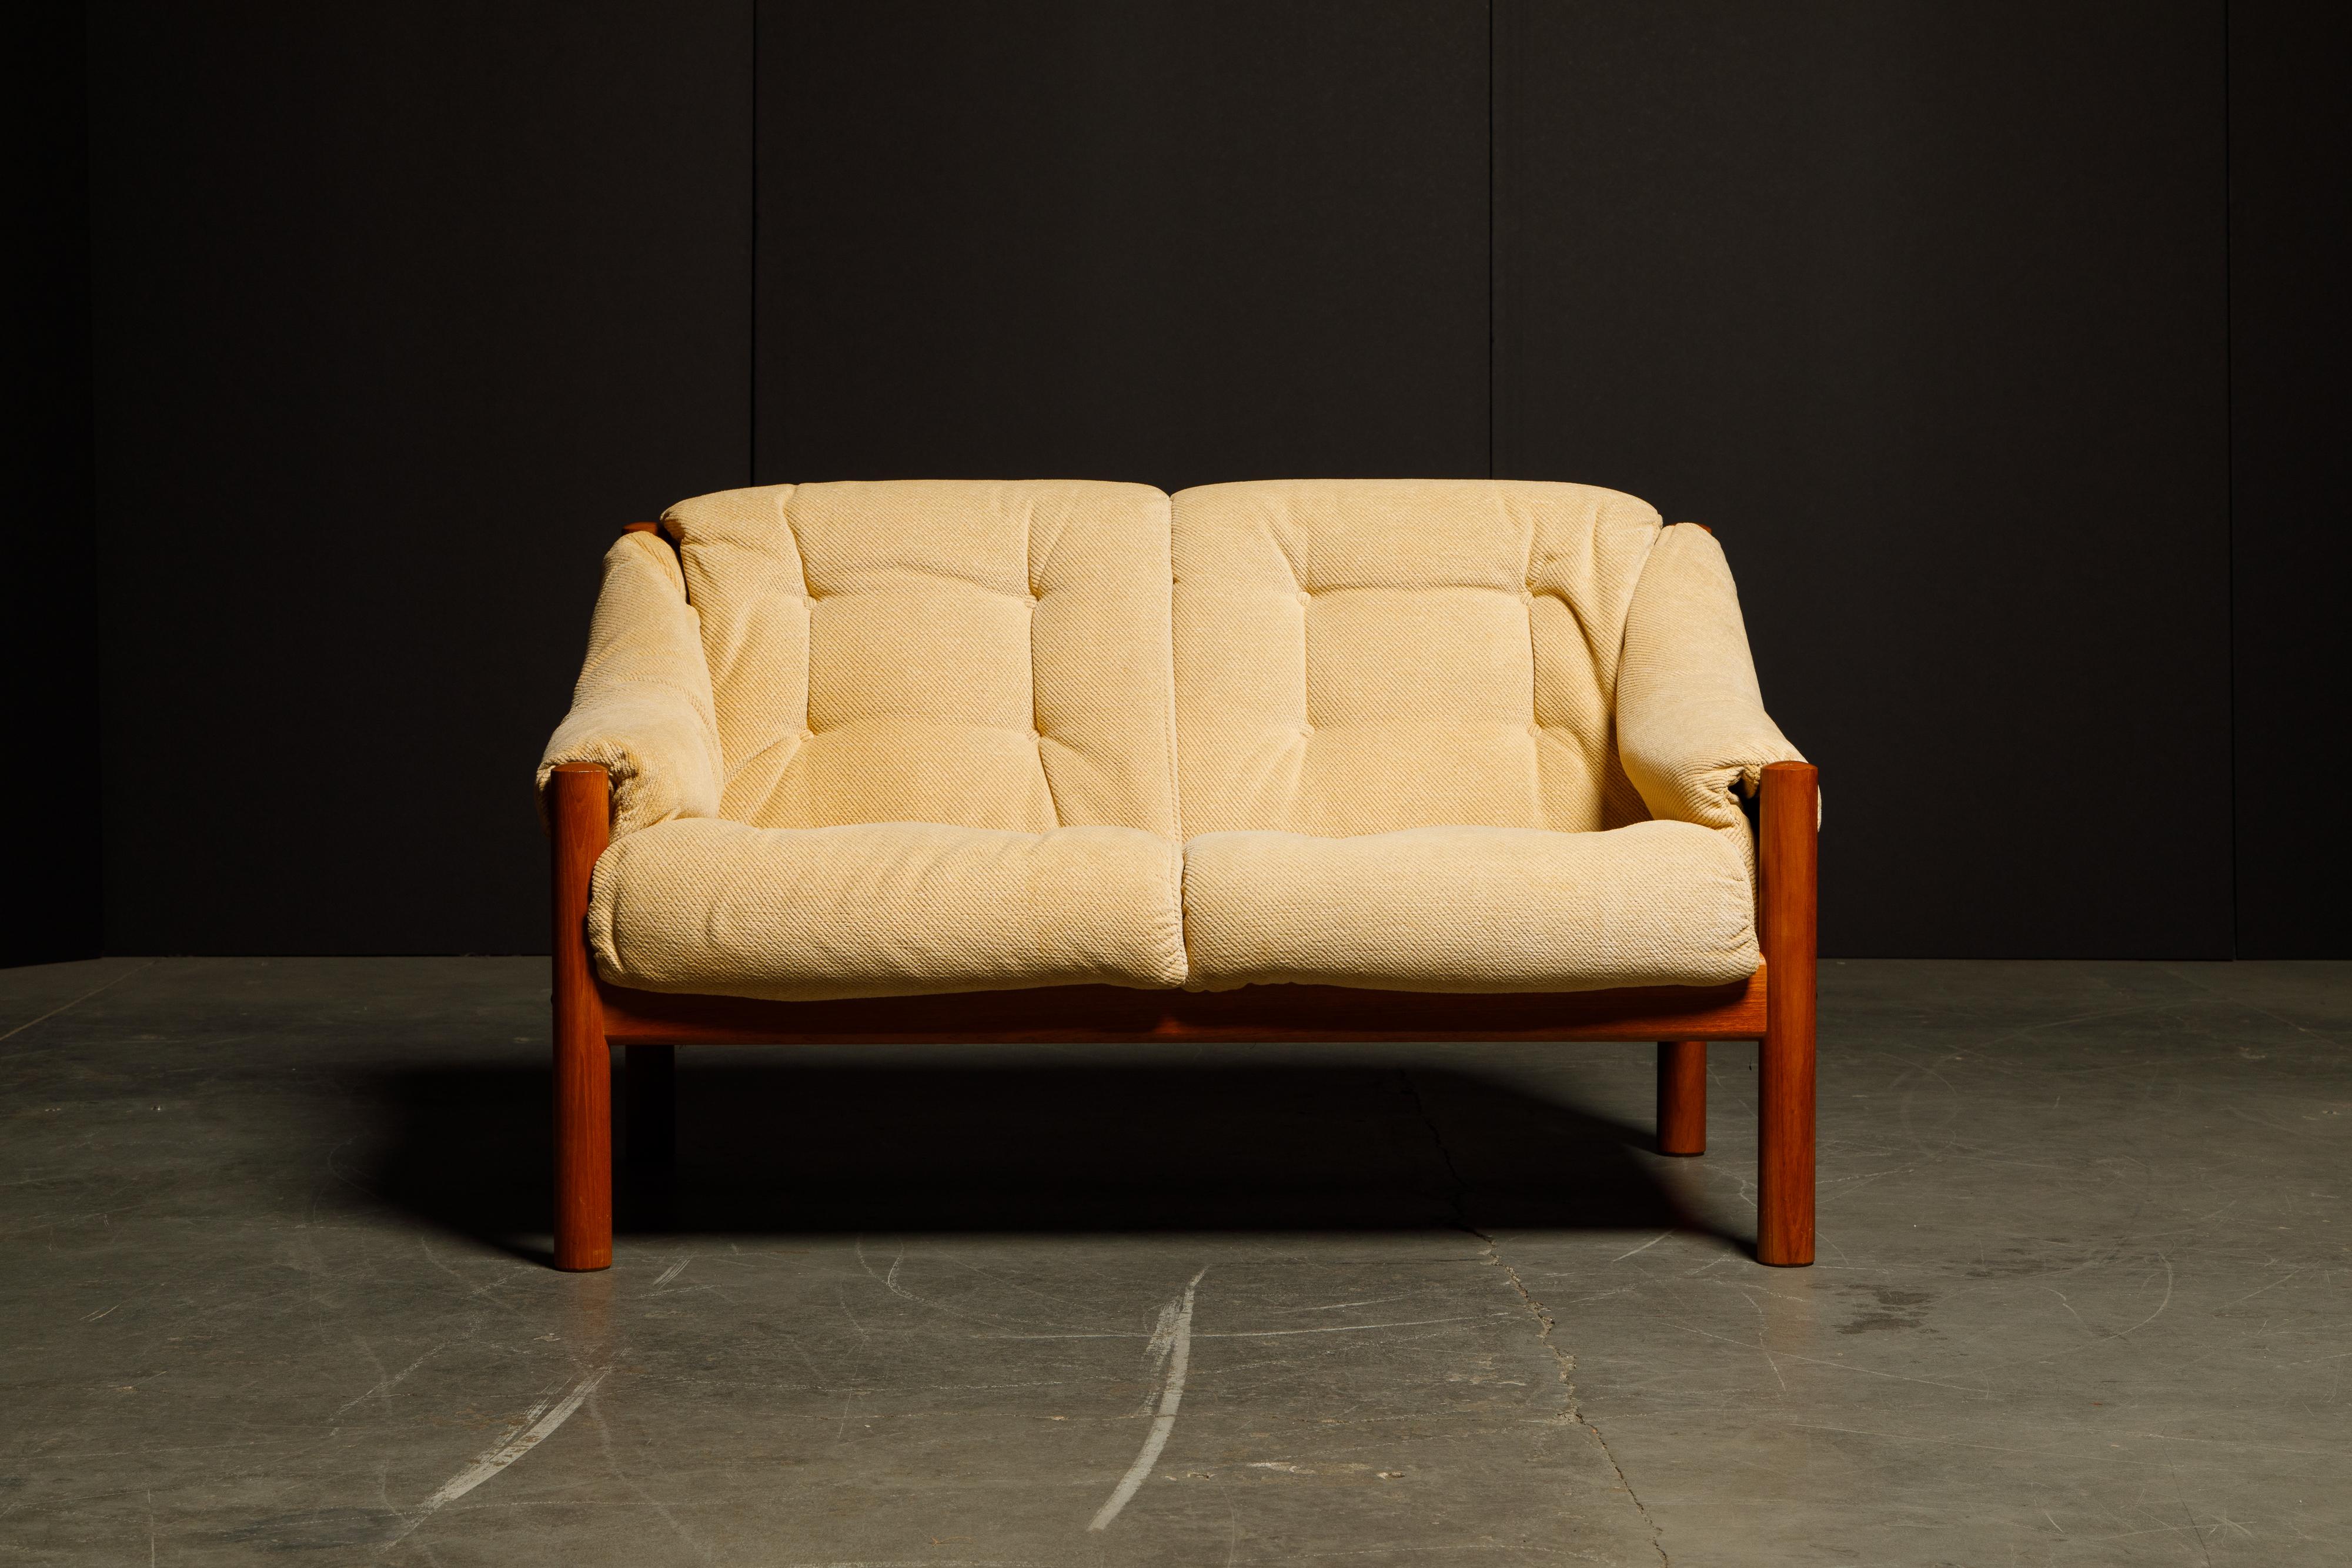 This Danish Mid-Century Modern loveseat from Domino Møbler, was made in the 1970's in Denmark. Featuring sculpted arms with a solid teak frame and cylindrical legs, with tufted cushions upholstered in its original fabric, making this sofa just as